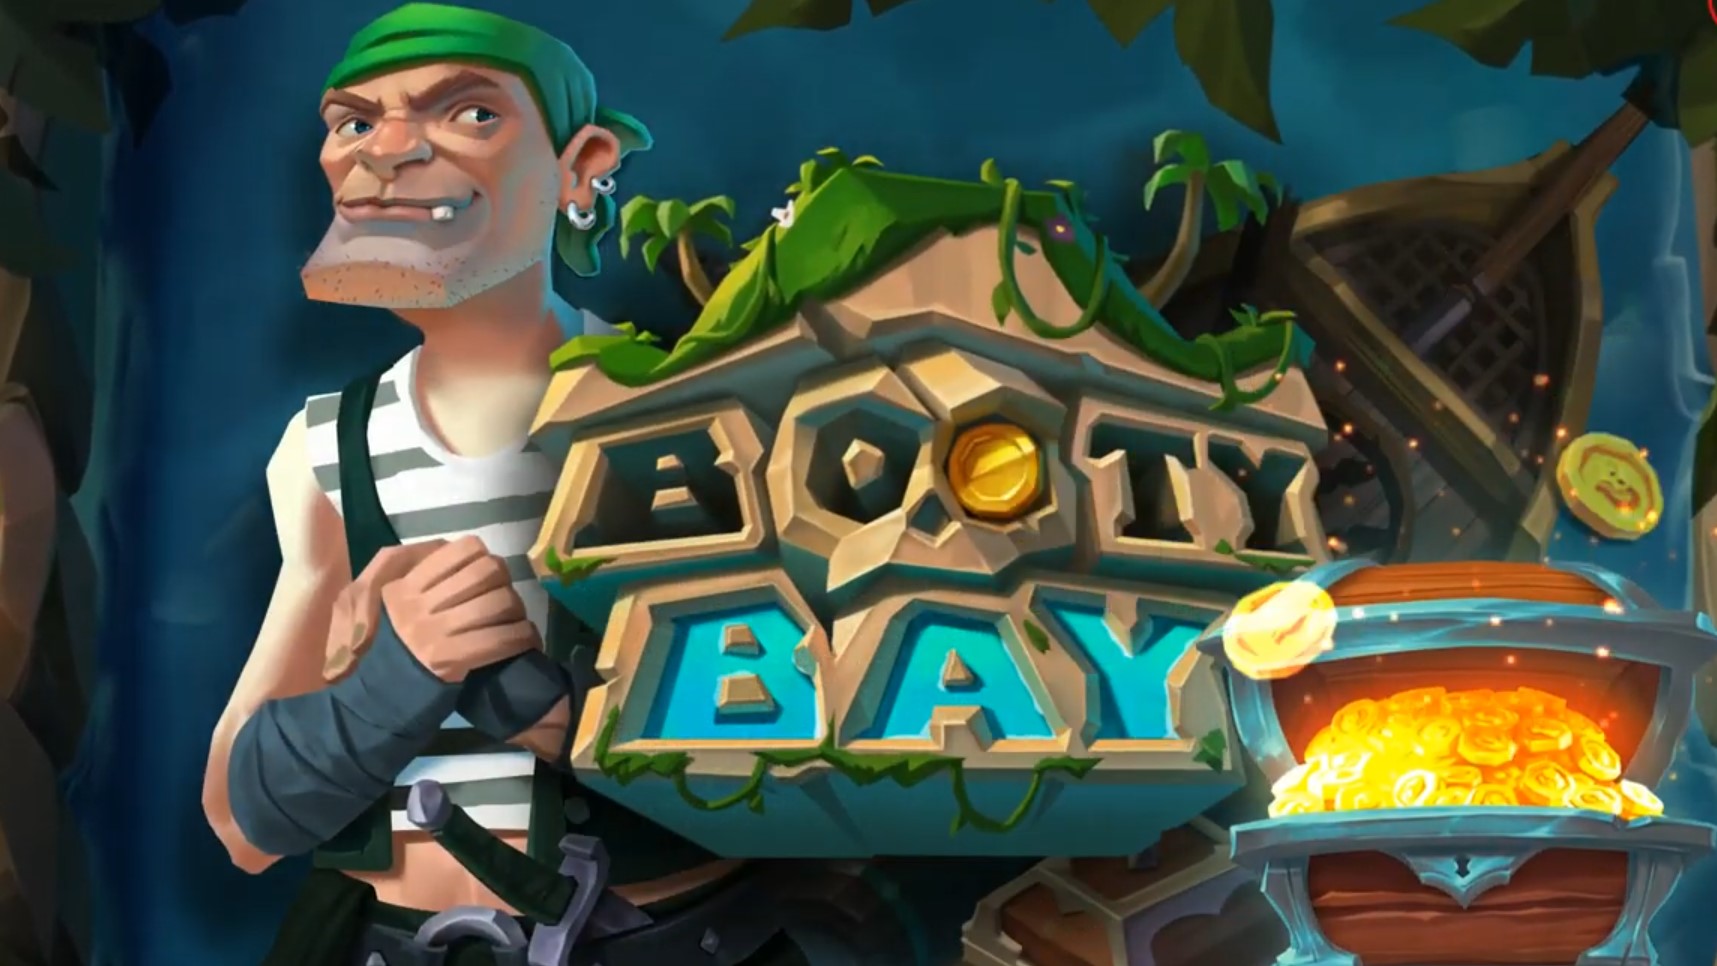 Speaking after the launch of the company’s most recent title Booty Bay, SlotBeats took a closer look at the inspiration behind the slots development, how Push differentiated its theme compared to other variations within the market